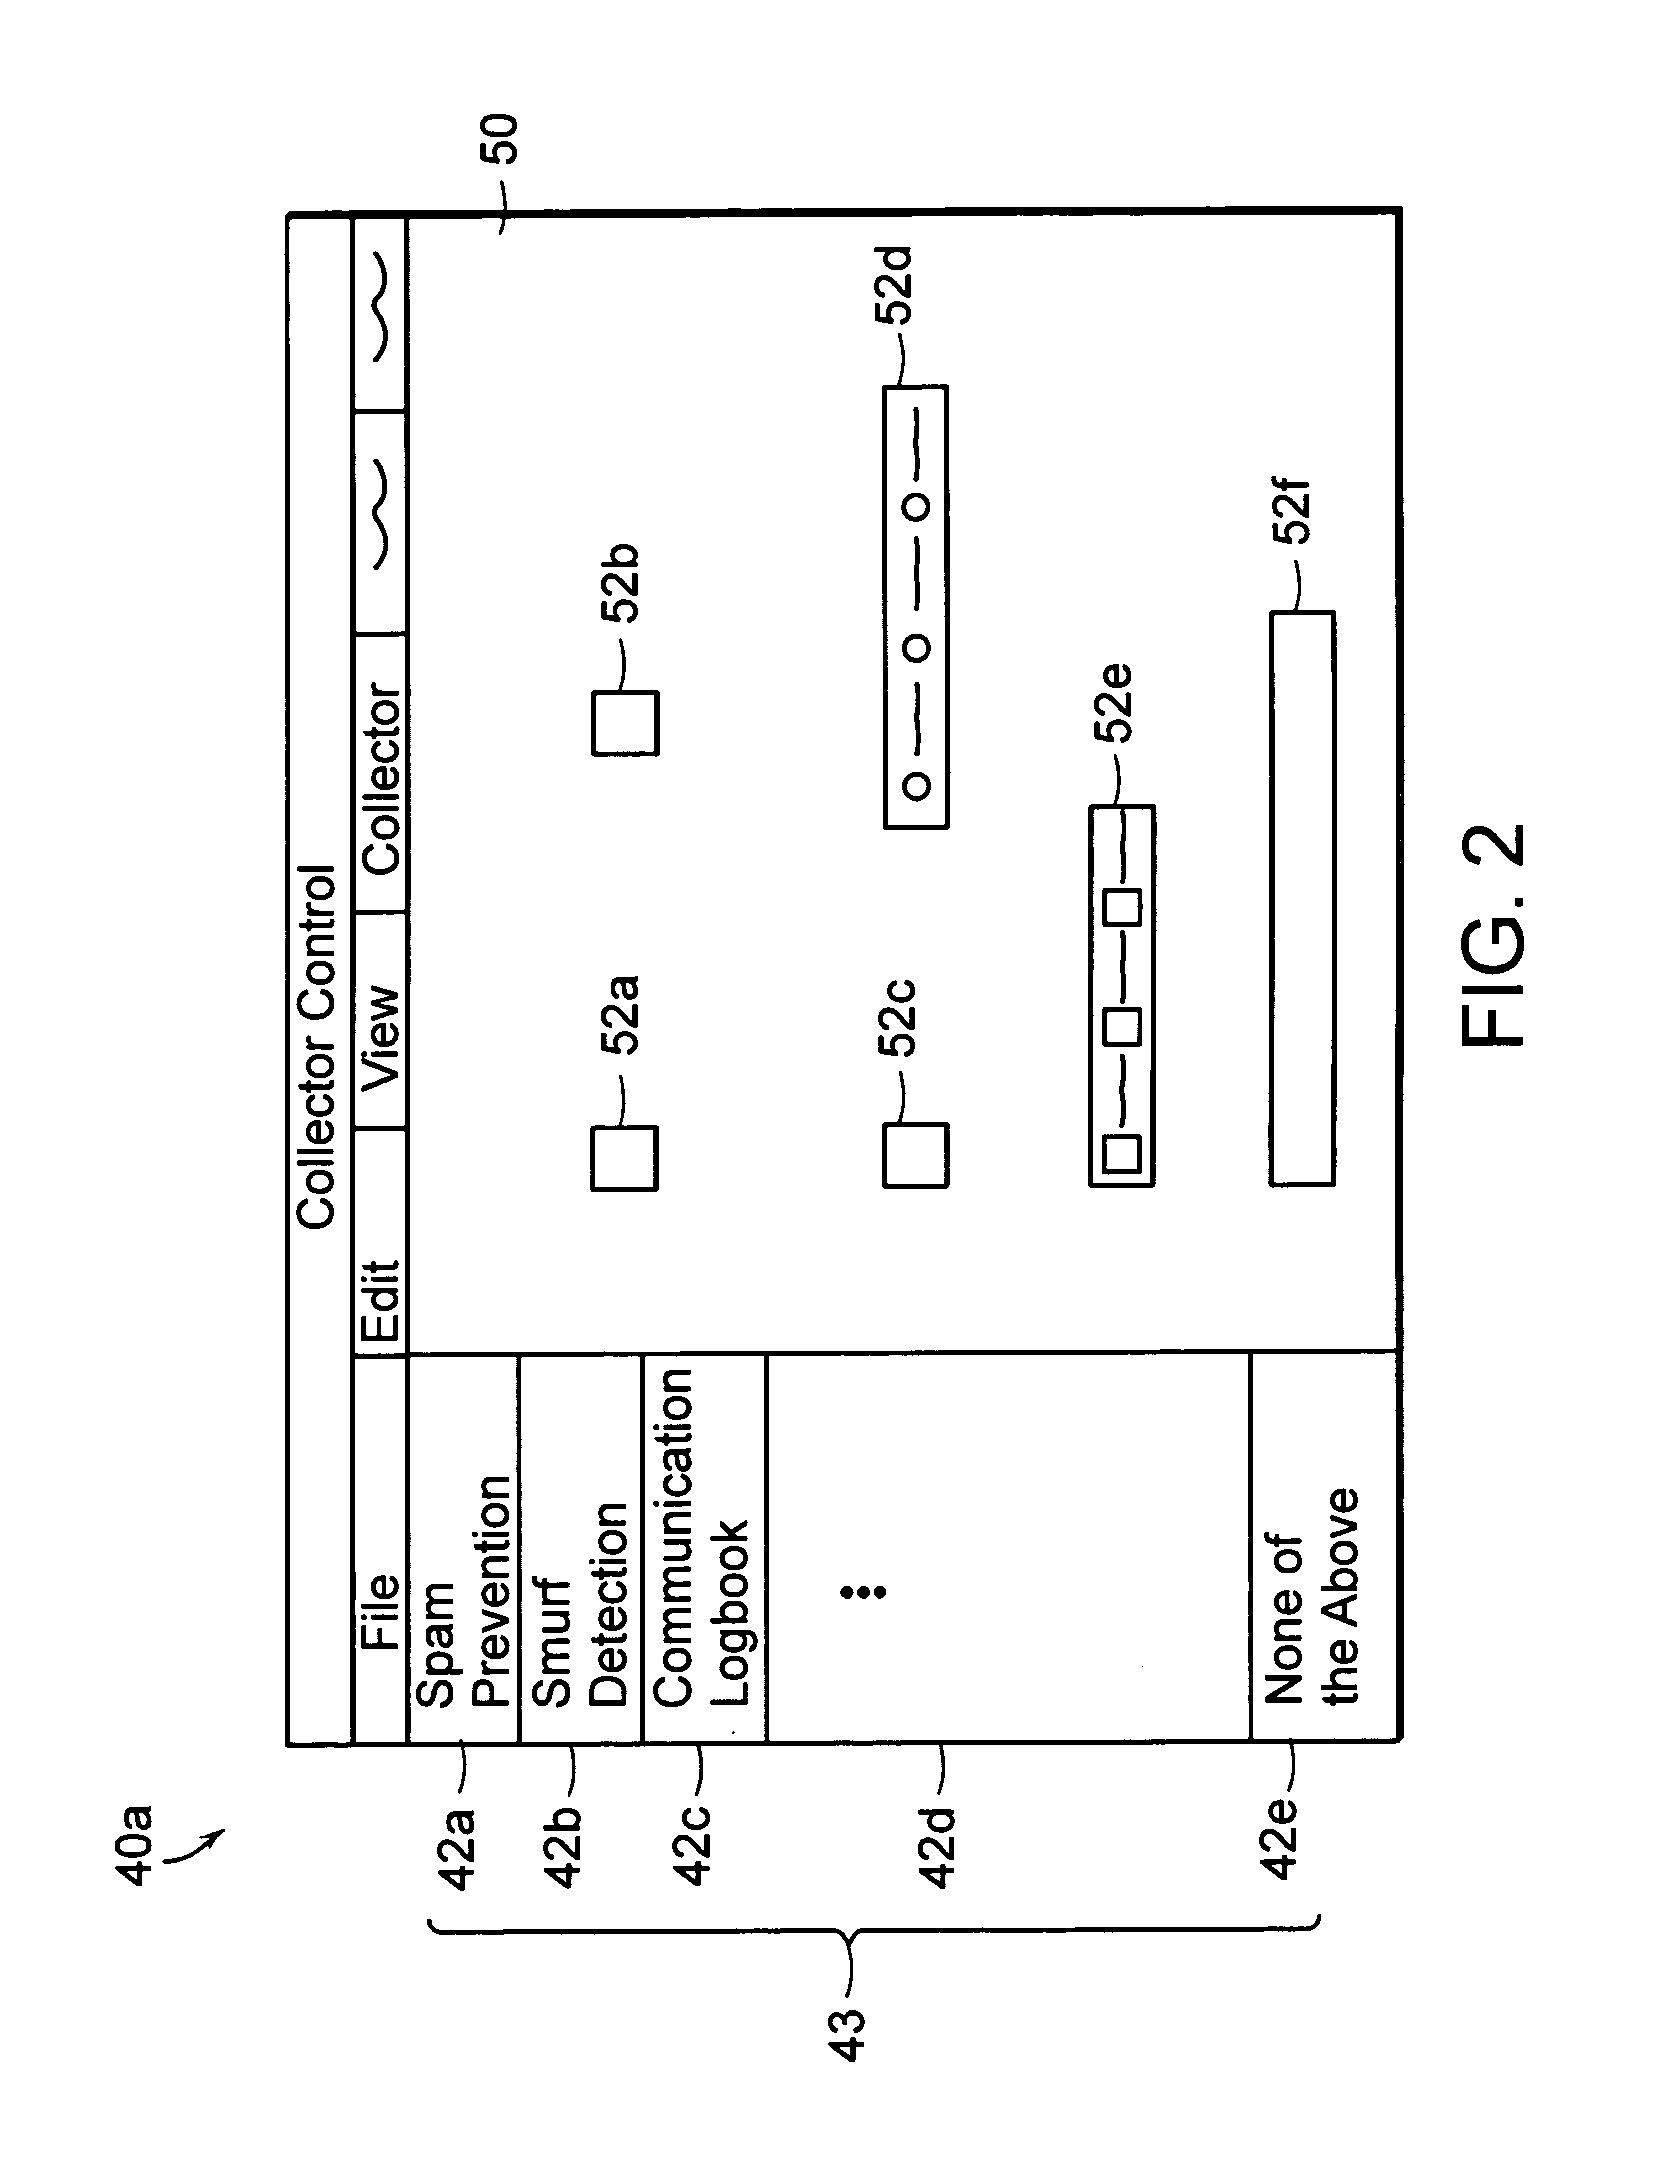 Method and apparatus for software technical support and training